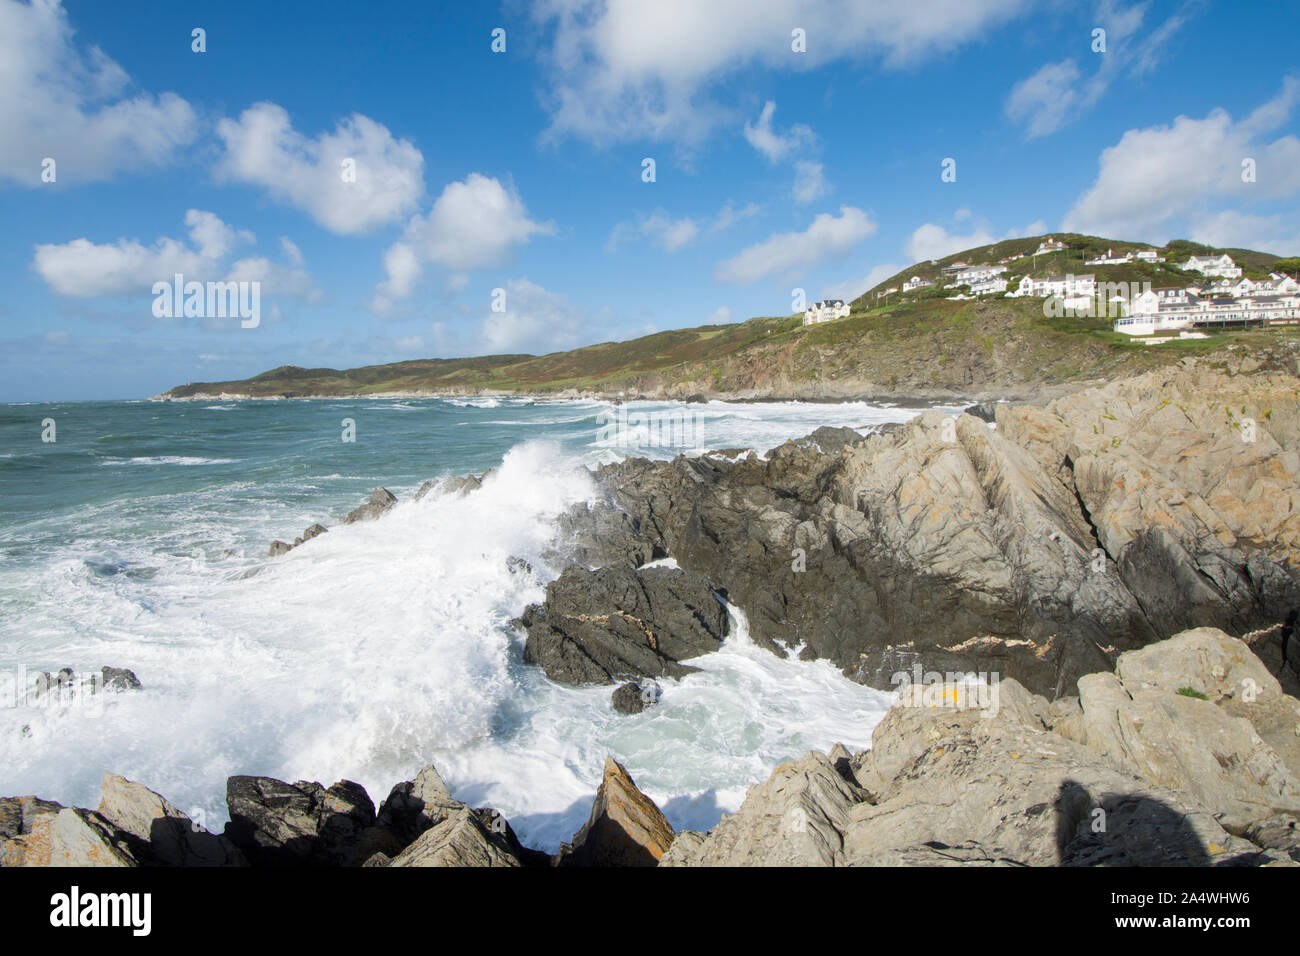 Sea breaking on rocks on foreshore, Woolacombe, view to Morte Point beside Mortehoe, breaking waves Stock Photo